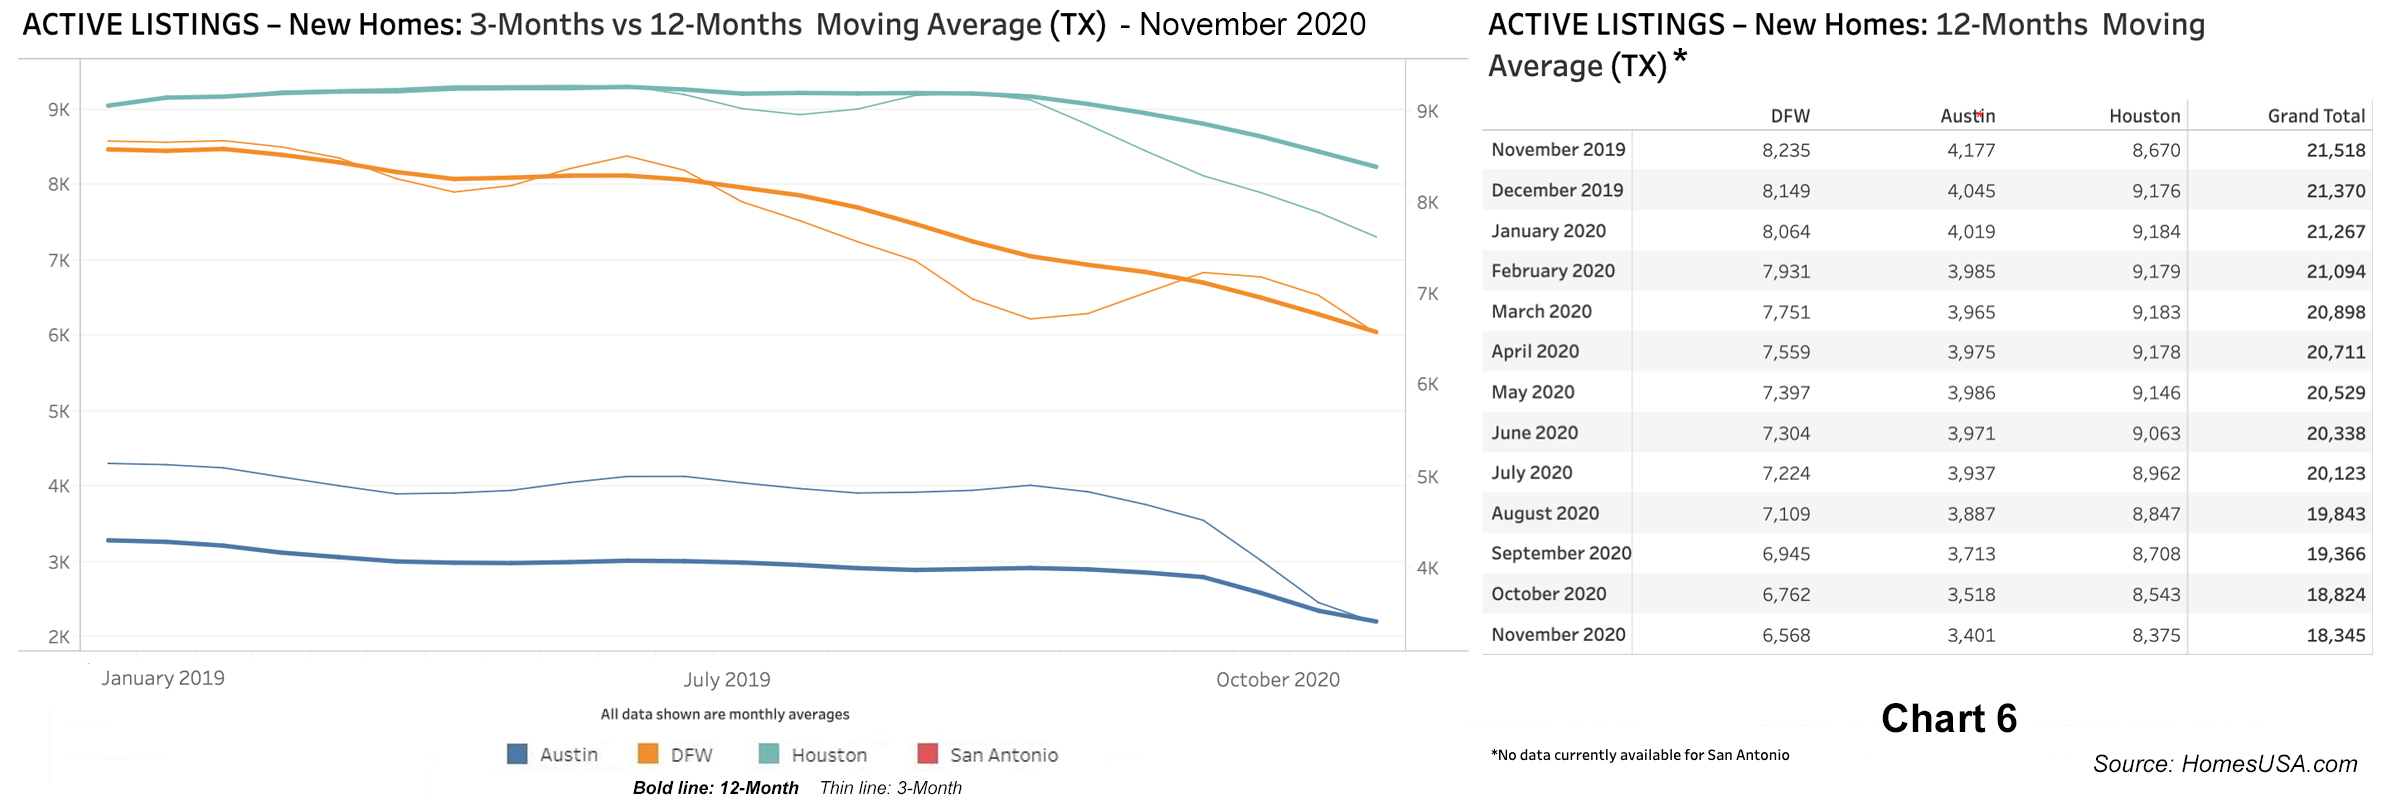 Chart 6: Active Listings for New Home Sales - November 2020